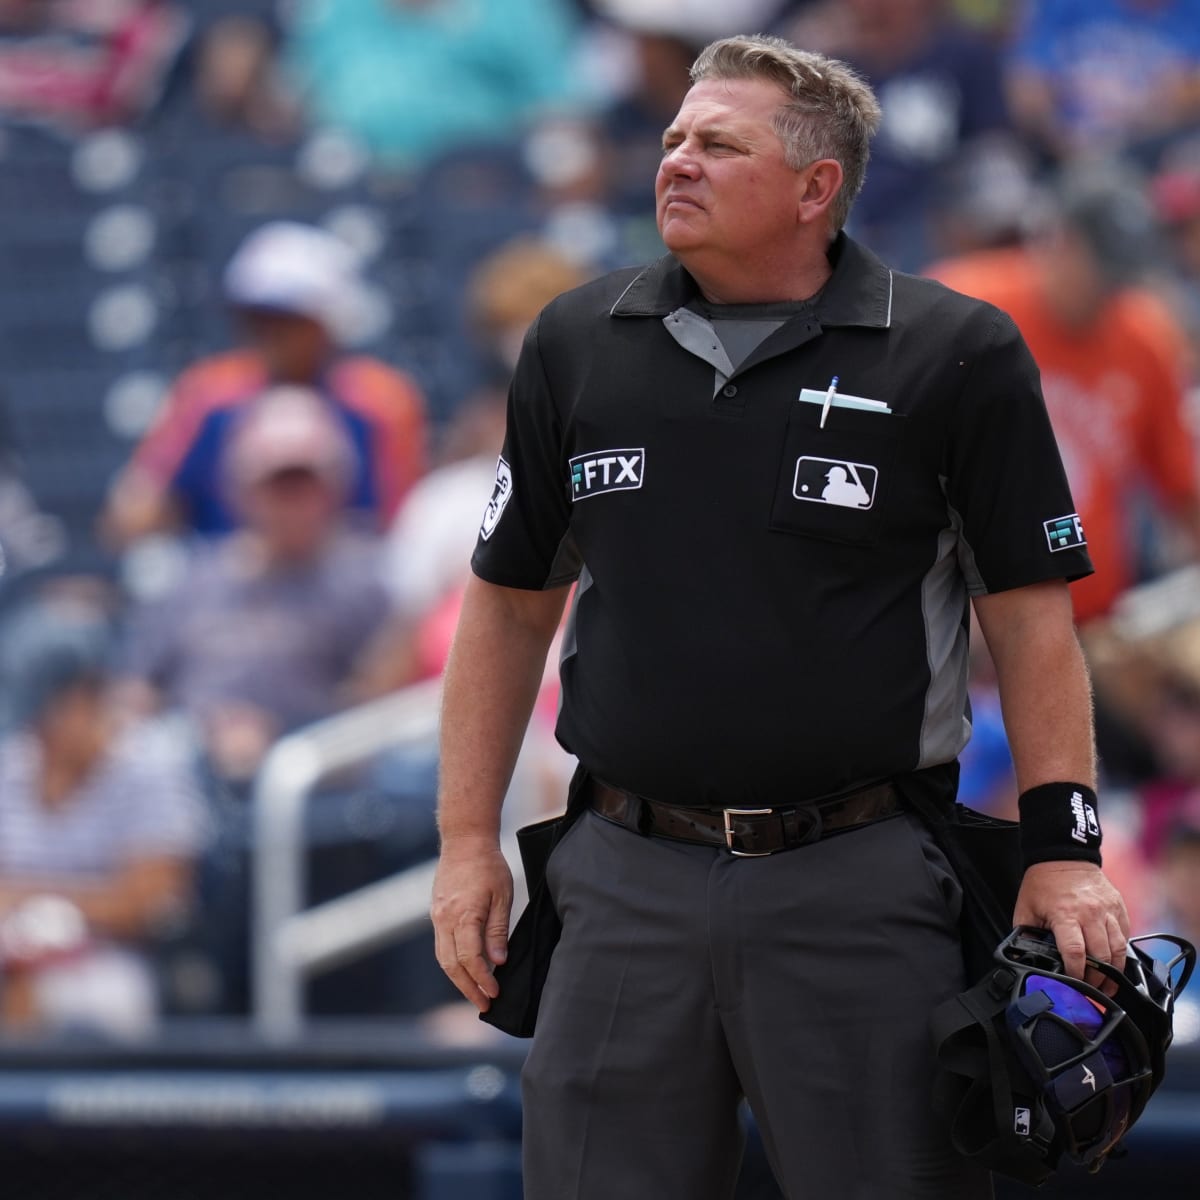 MLB News: Umpires To Wear Microphones During On-Field Reviews